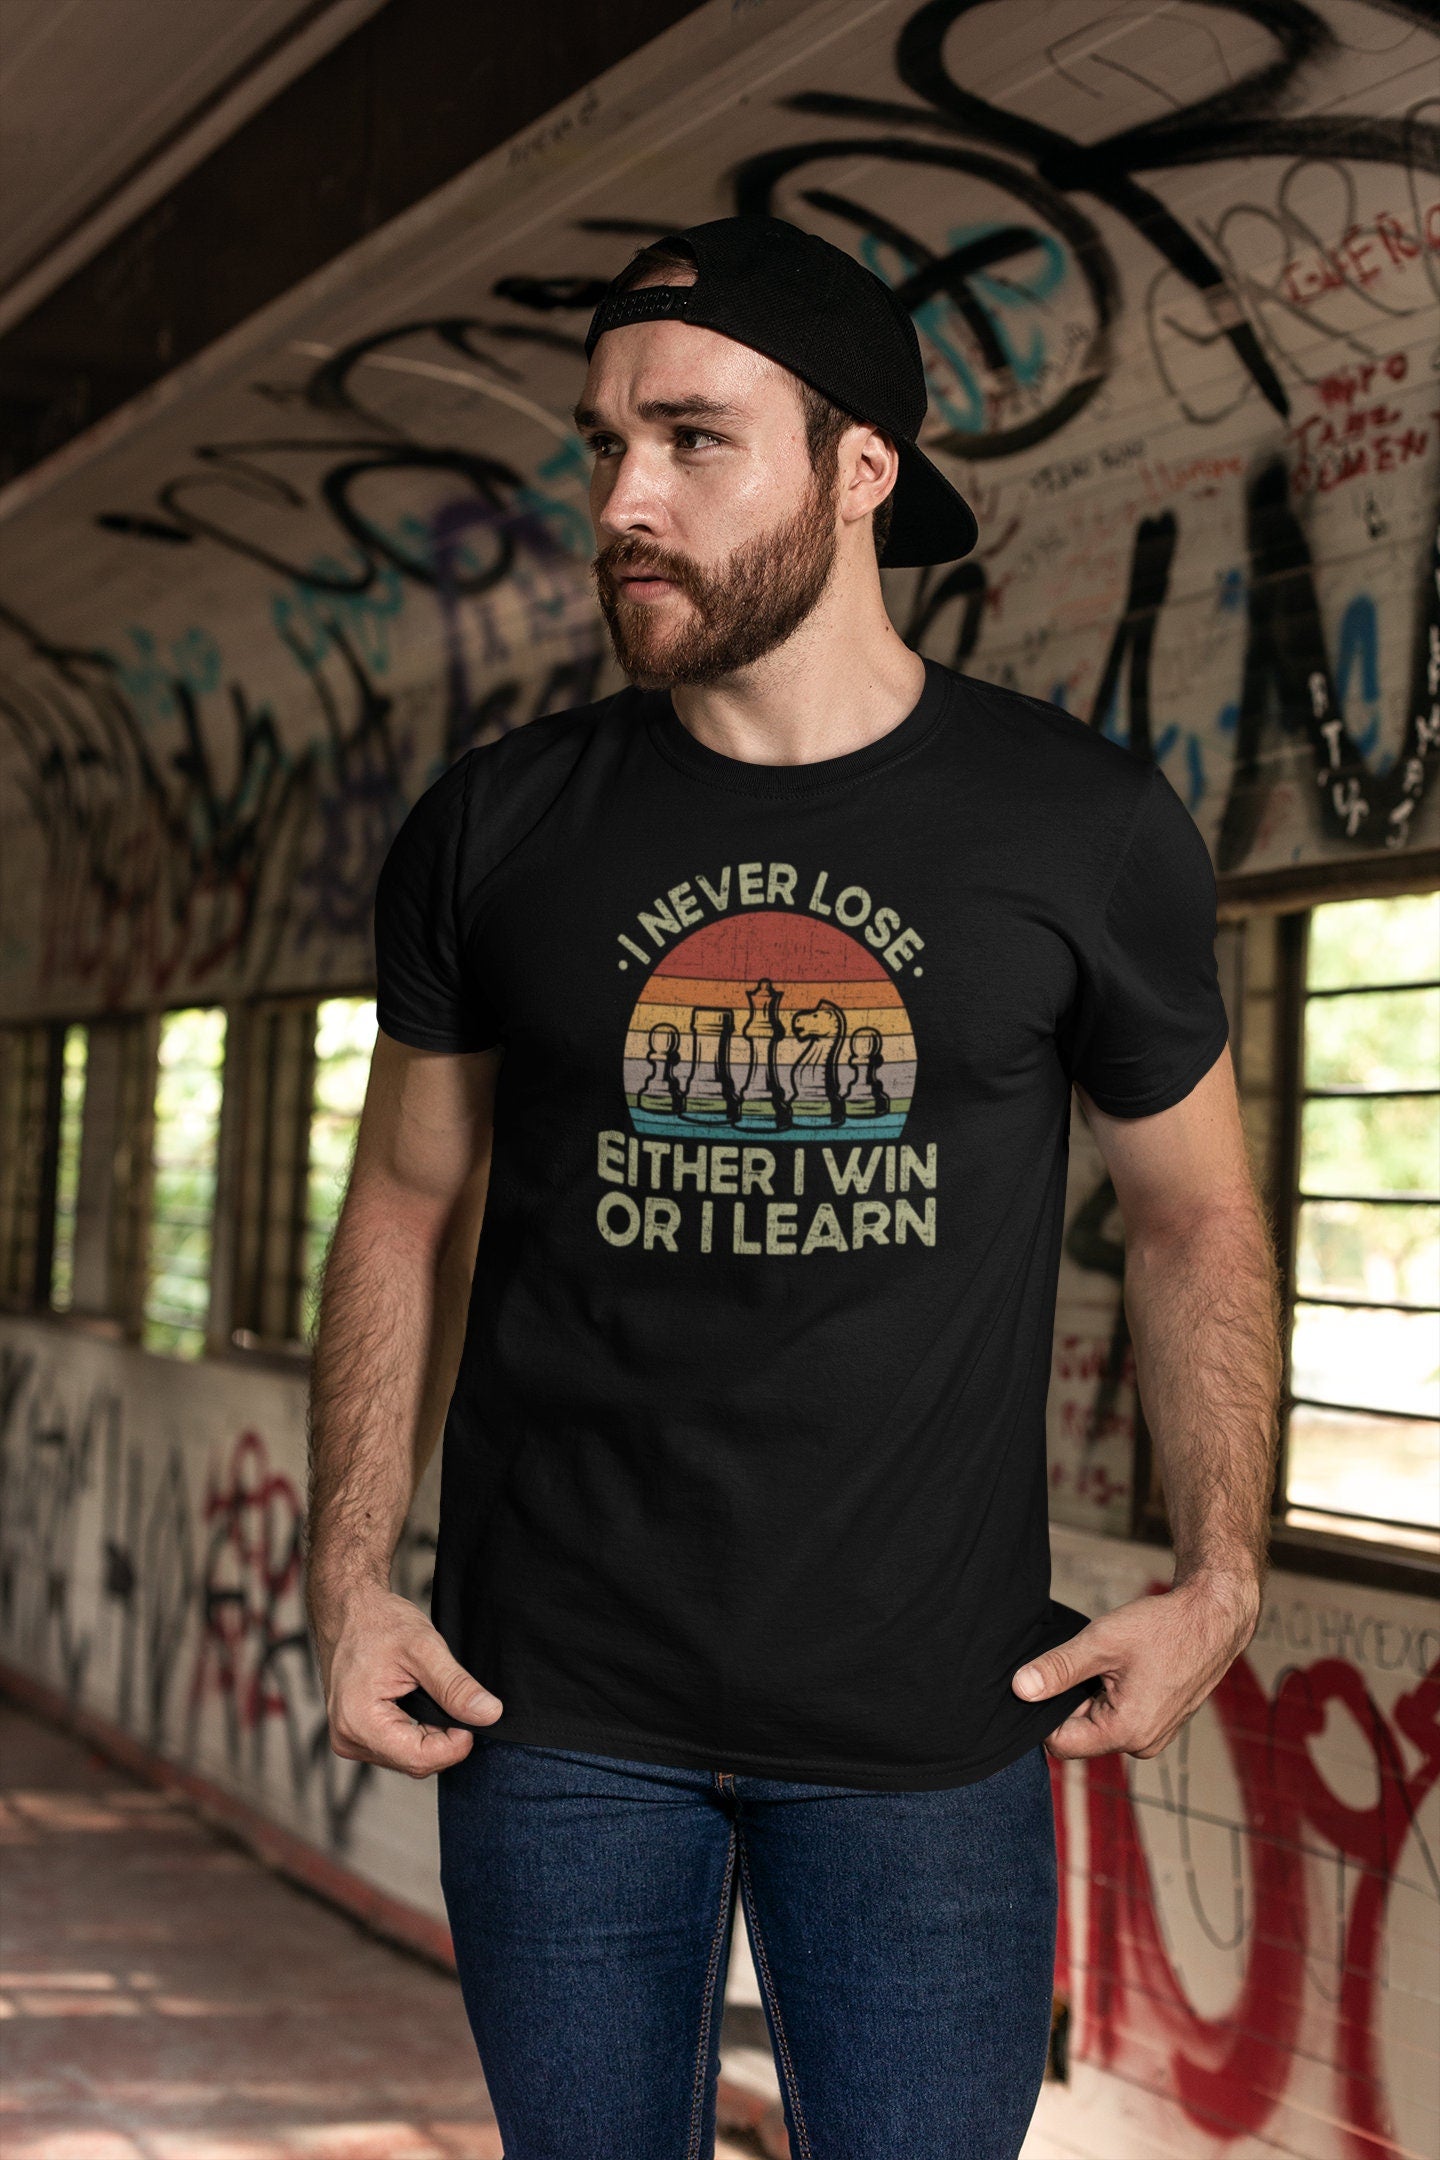 I Never Lose Either I Win Or I Learn Shirt, Funny Chess Shirt, Chess Pieces, Chess Tournament Shirt